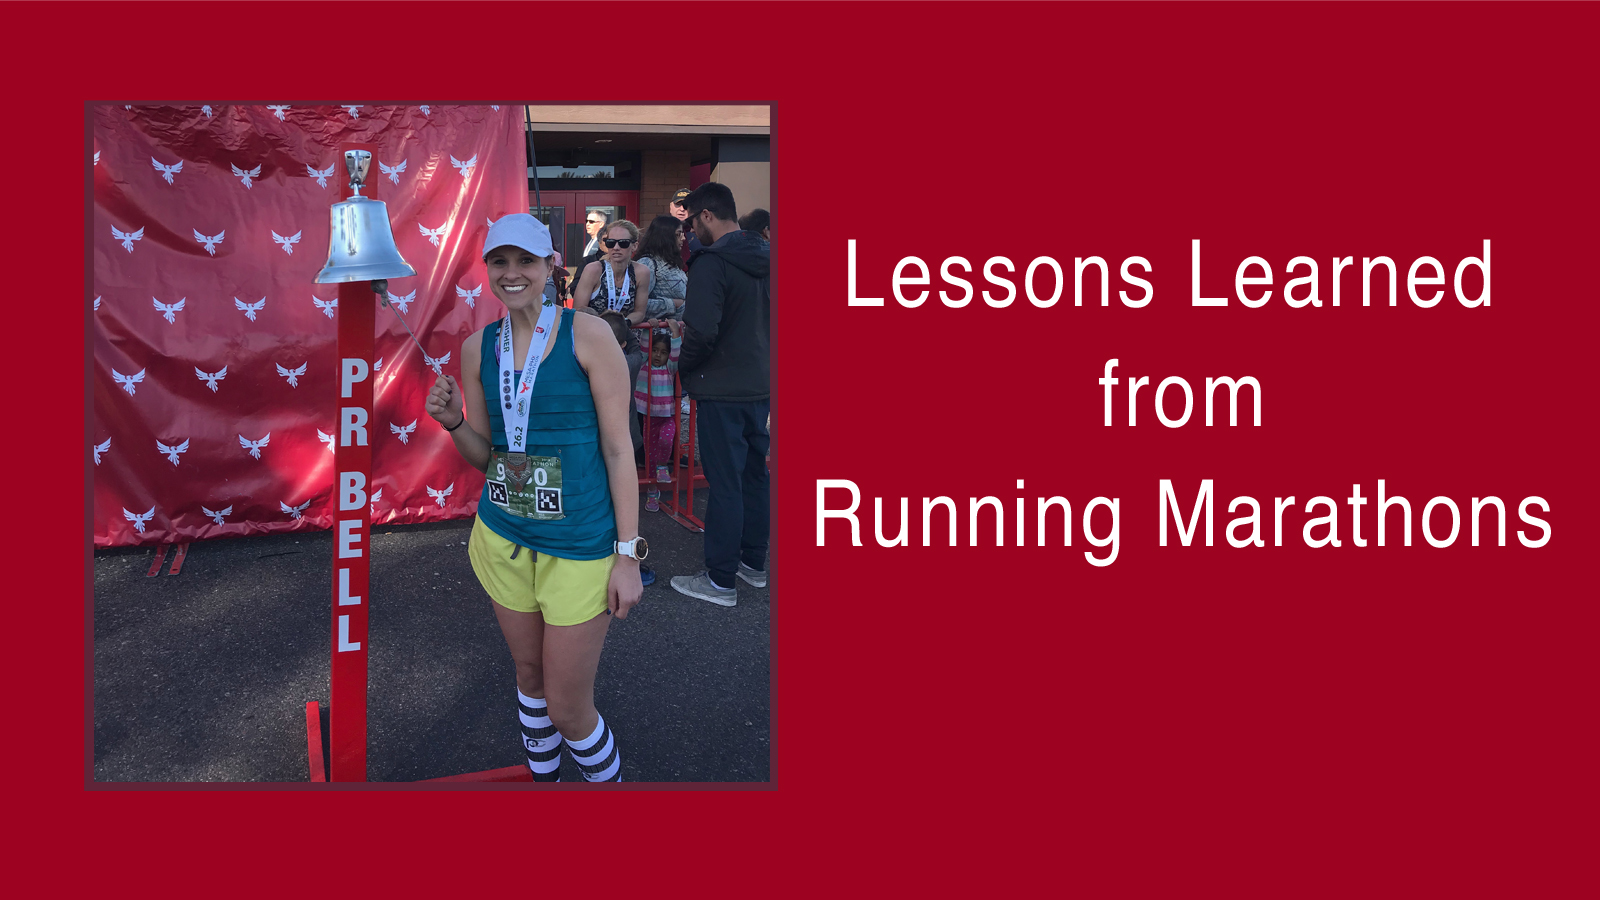 Lessons Learned from Running Marathons